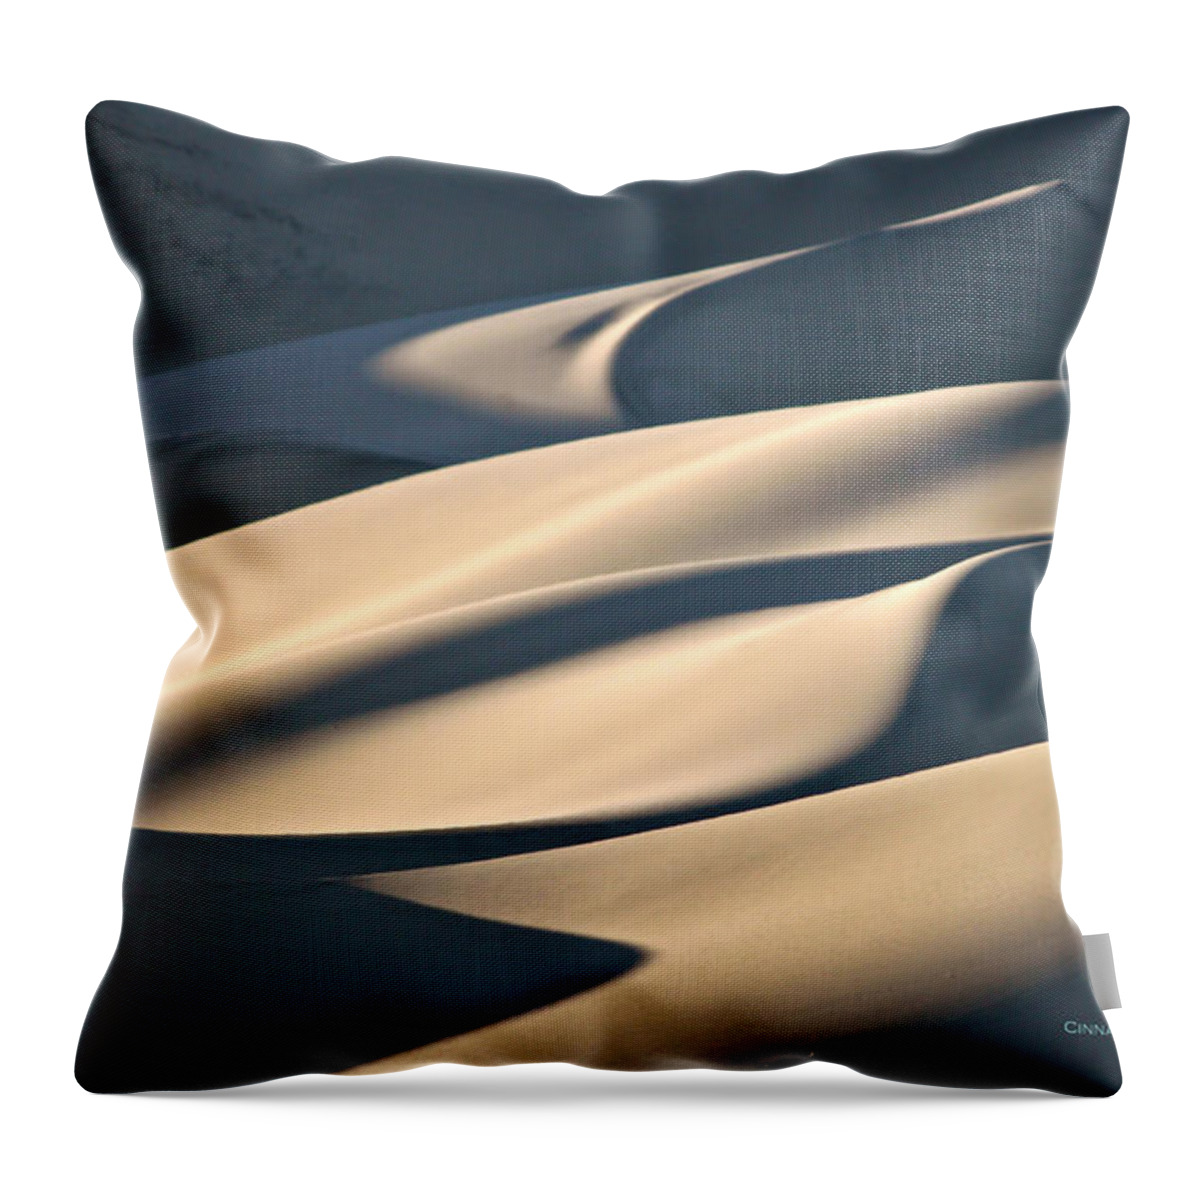 Eureka Sand Dunes Throw Pillow featuring the photograph Cake Frosting by Michael Cinnamond